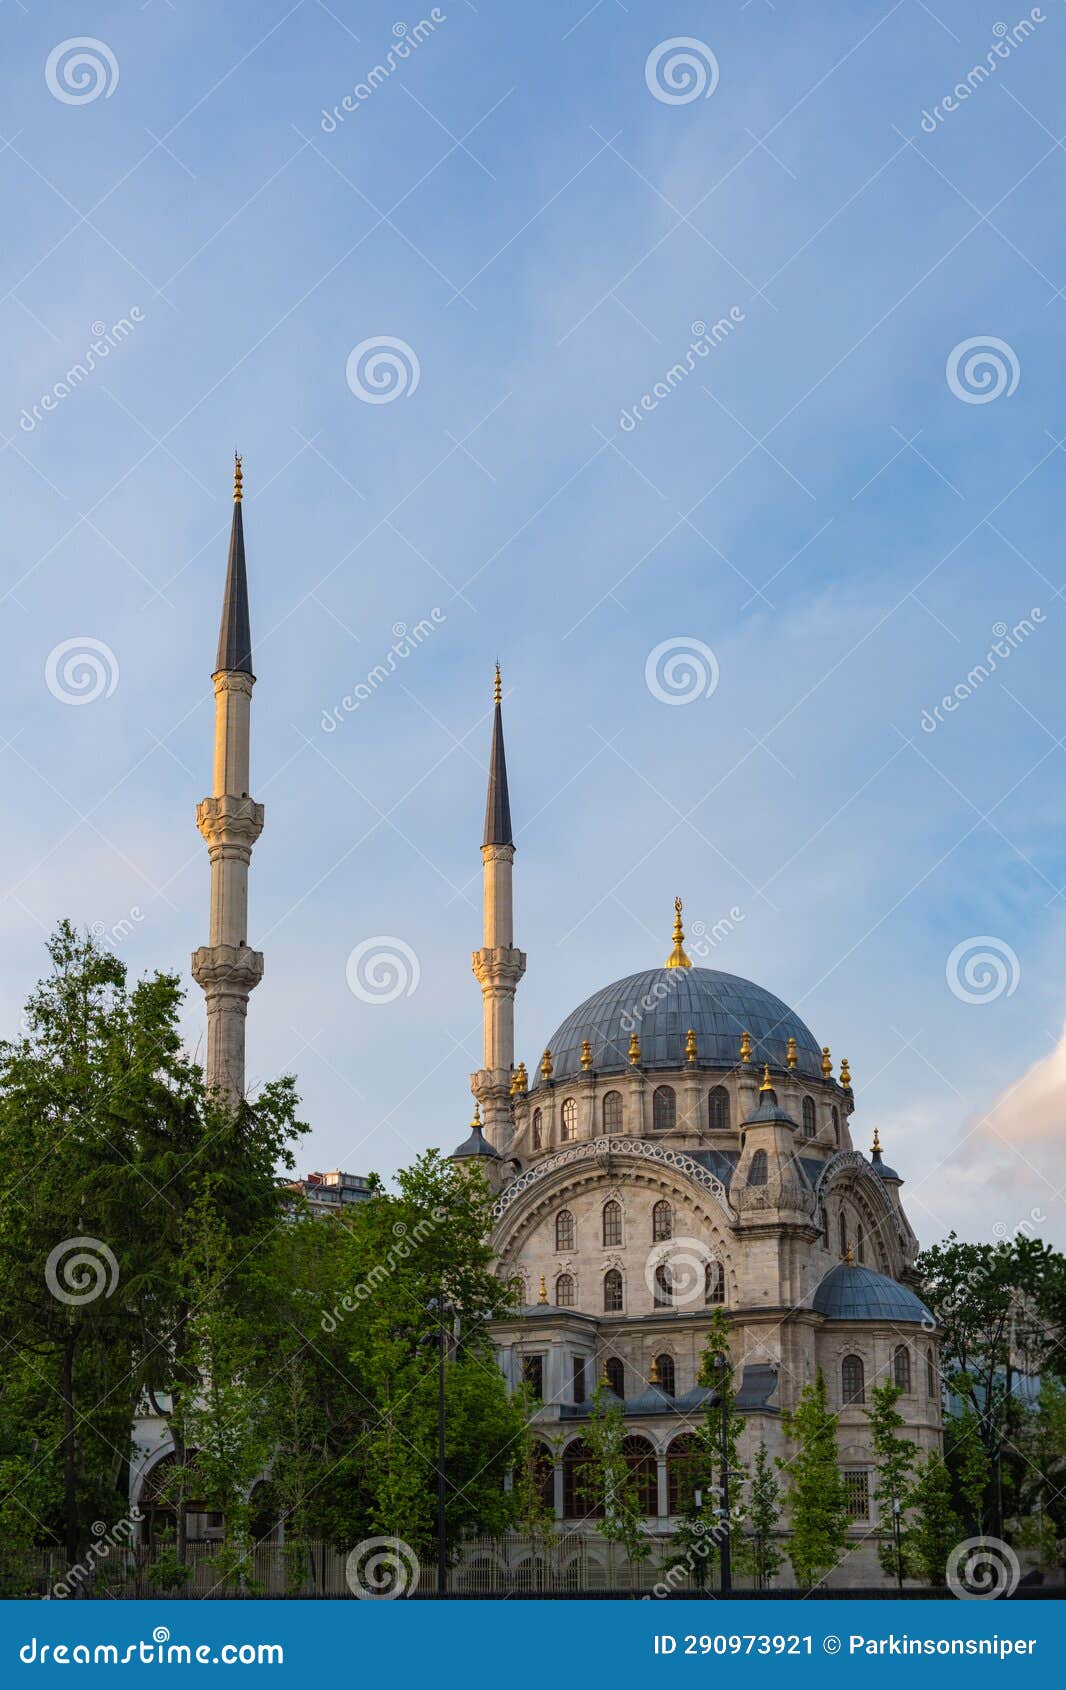 twin minarets mosque in istanbul